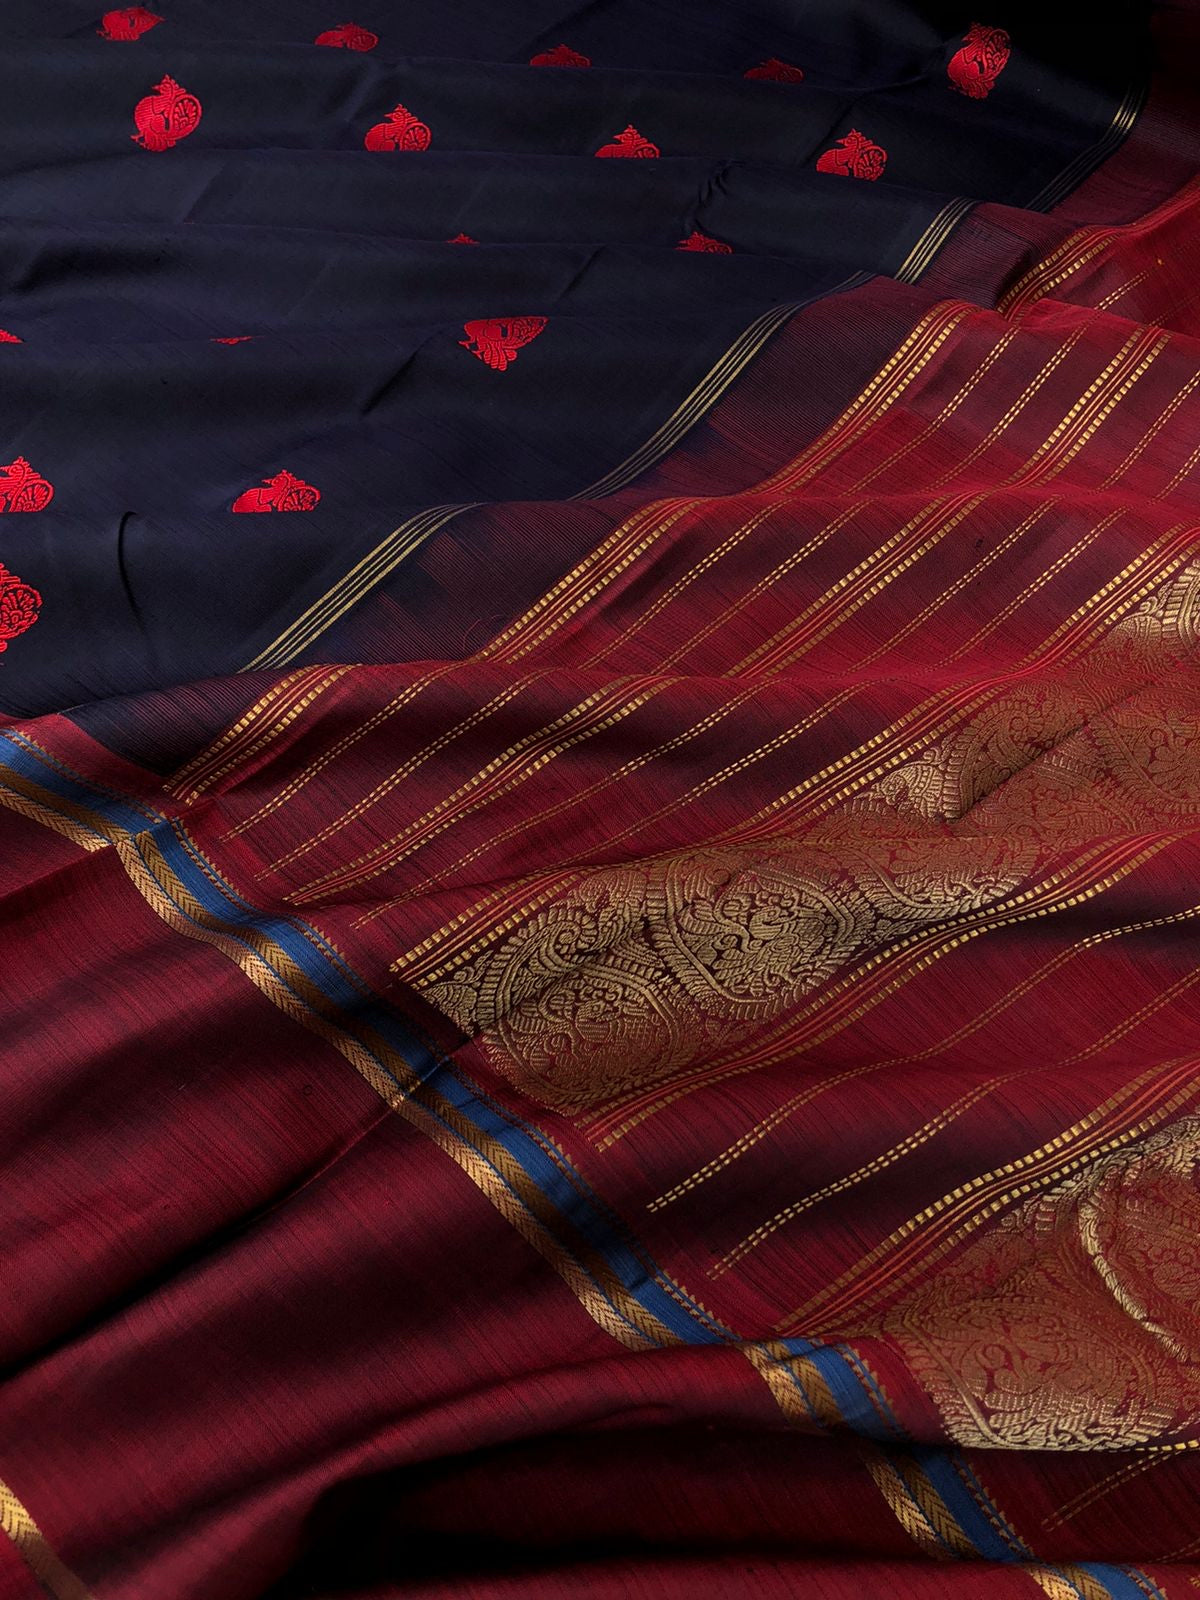 Kaavyam on Kanchivaram - the one of a kind deep mid night black blue body with annapakshi woven buttas with deep maroon borders pallu and blouse